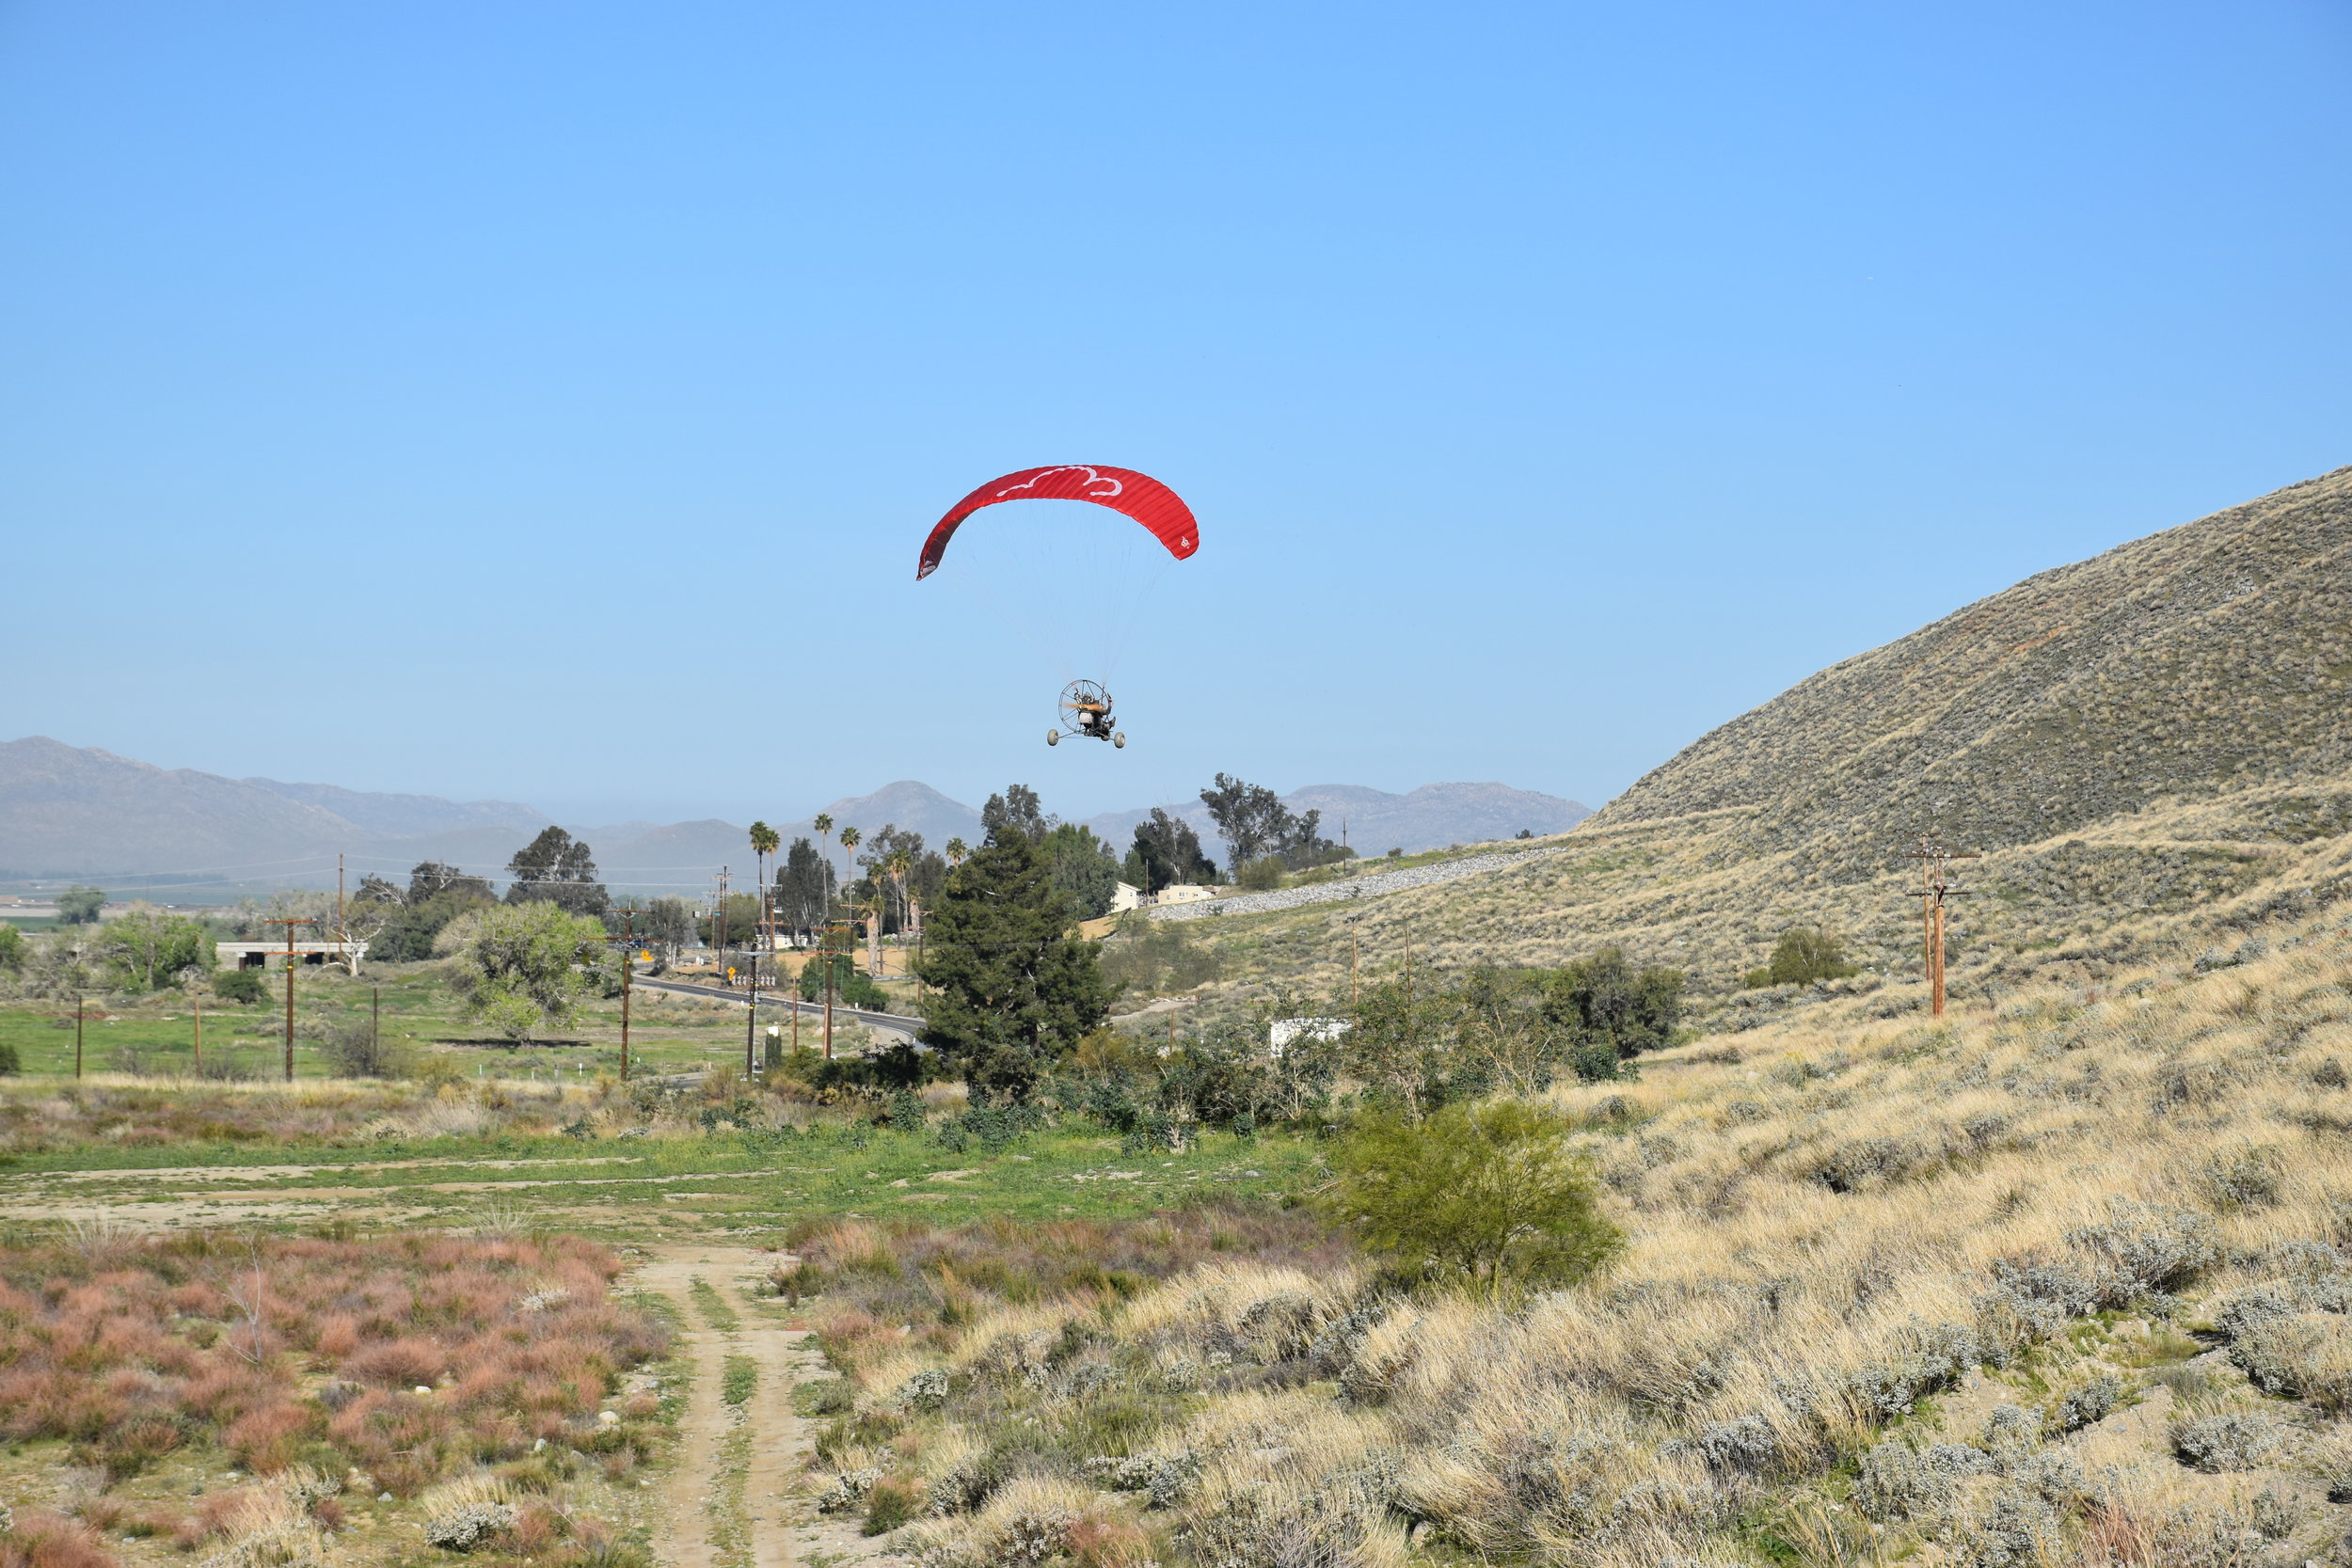 red paraglider touching down, Soboba Flight Park, learn paragliding and paramotoring at our camp